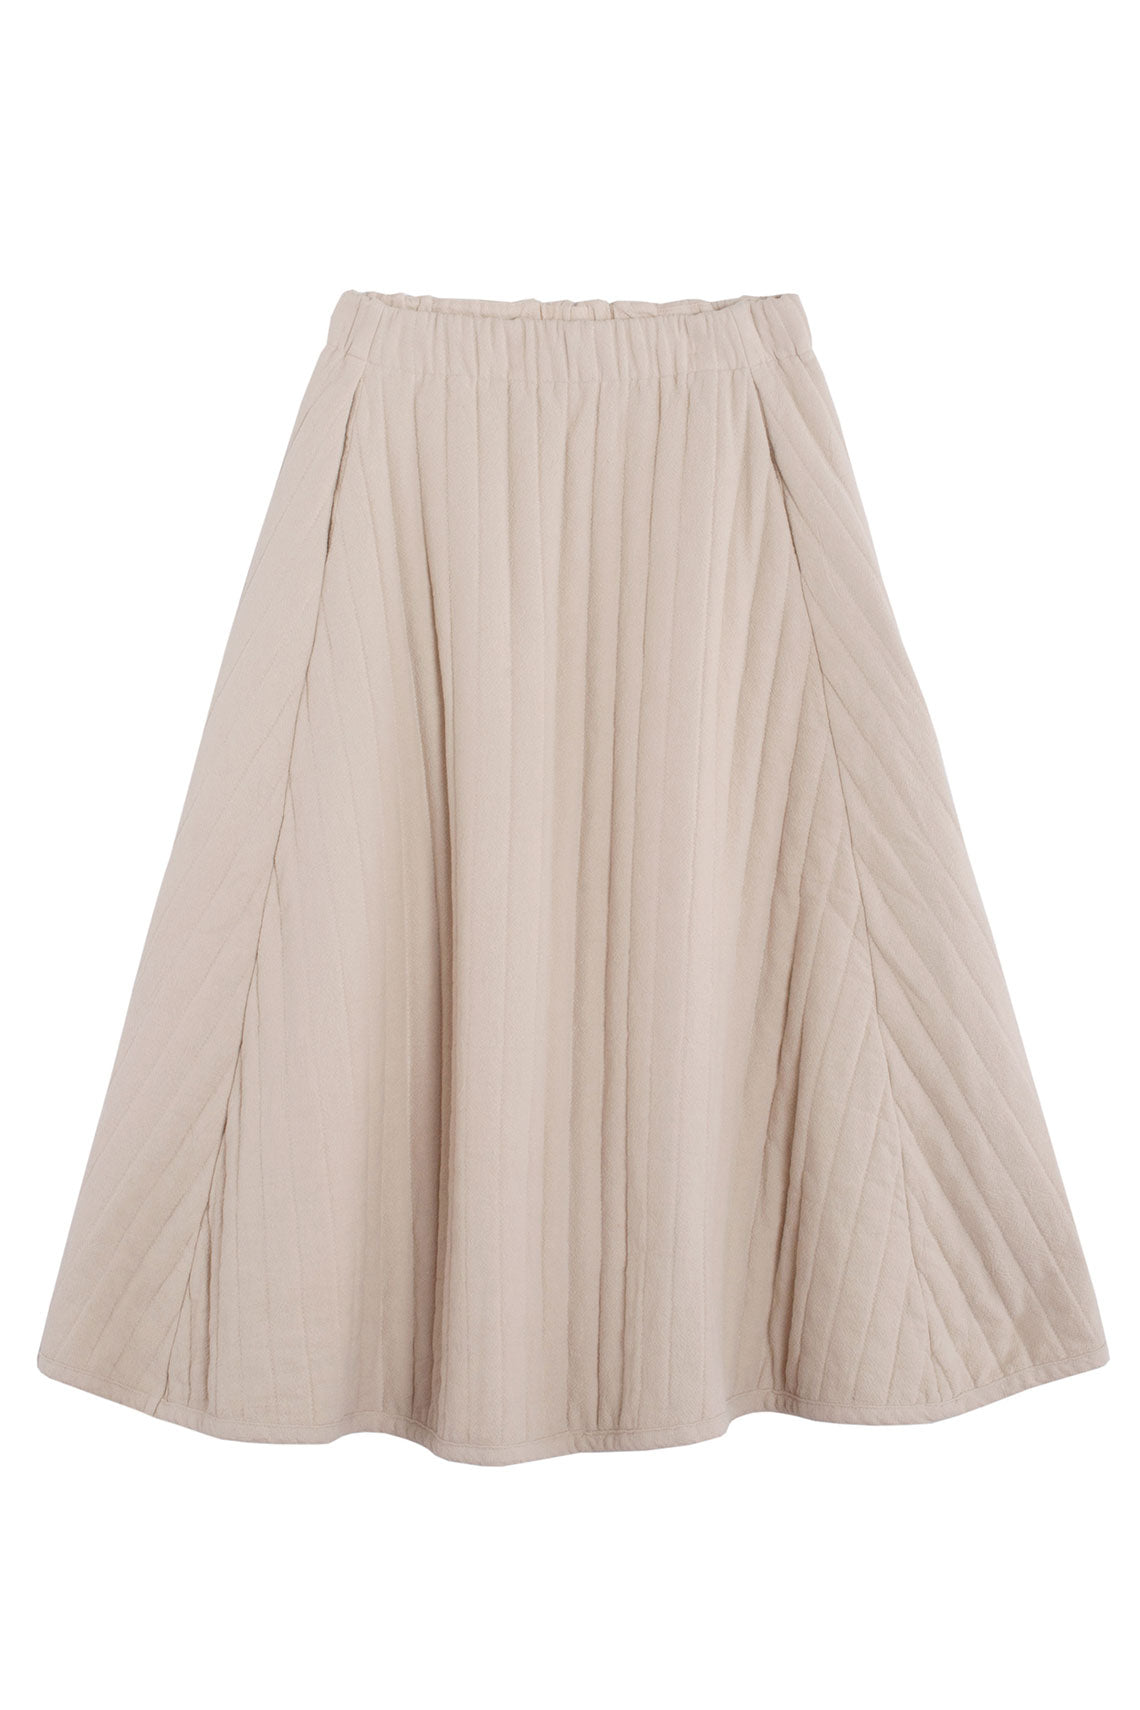 Ivory Quilted Skirt